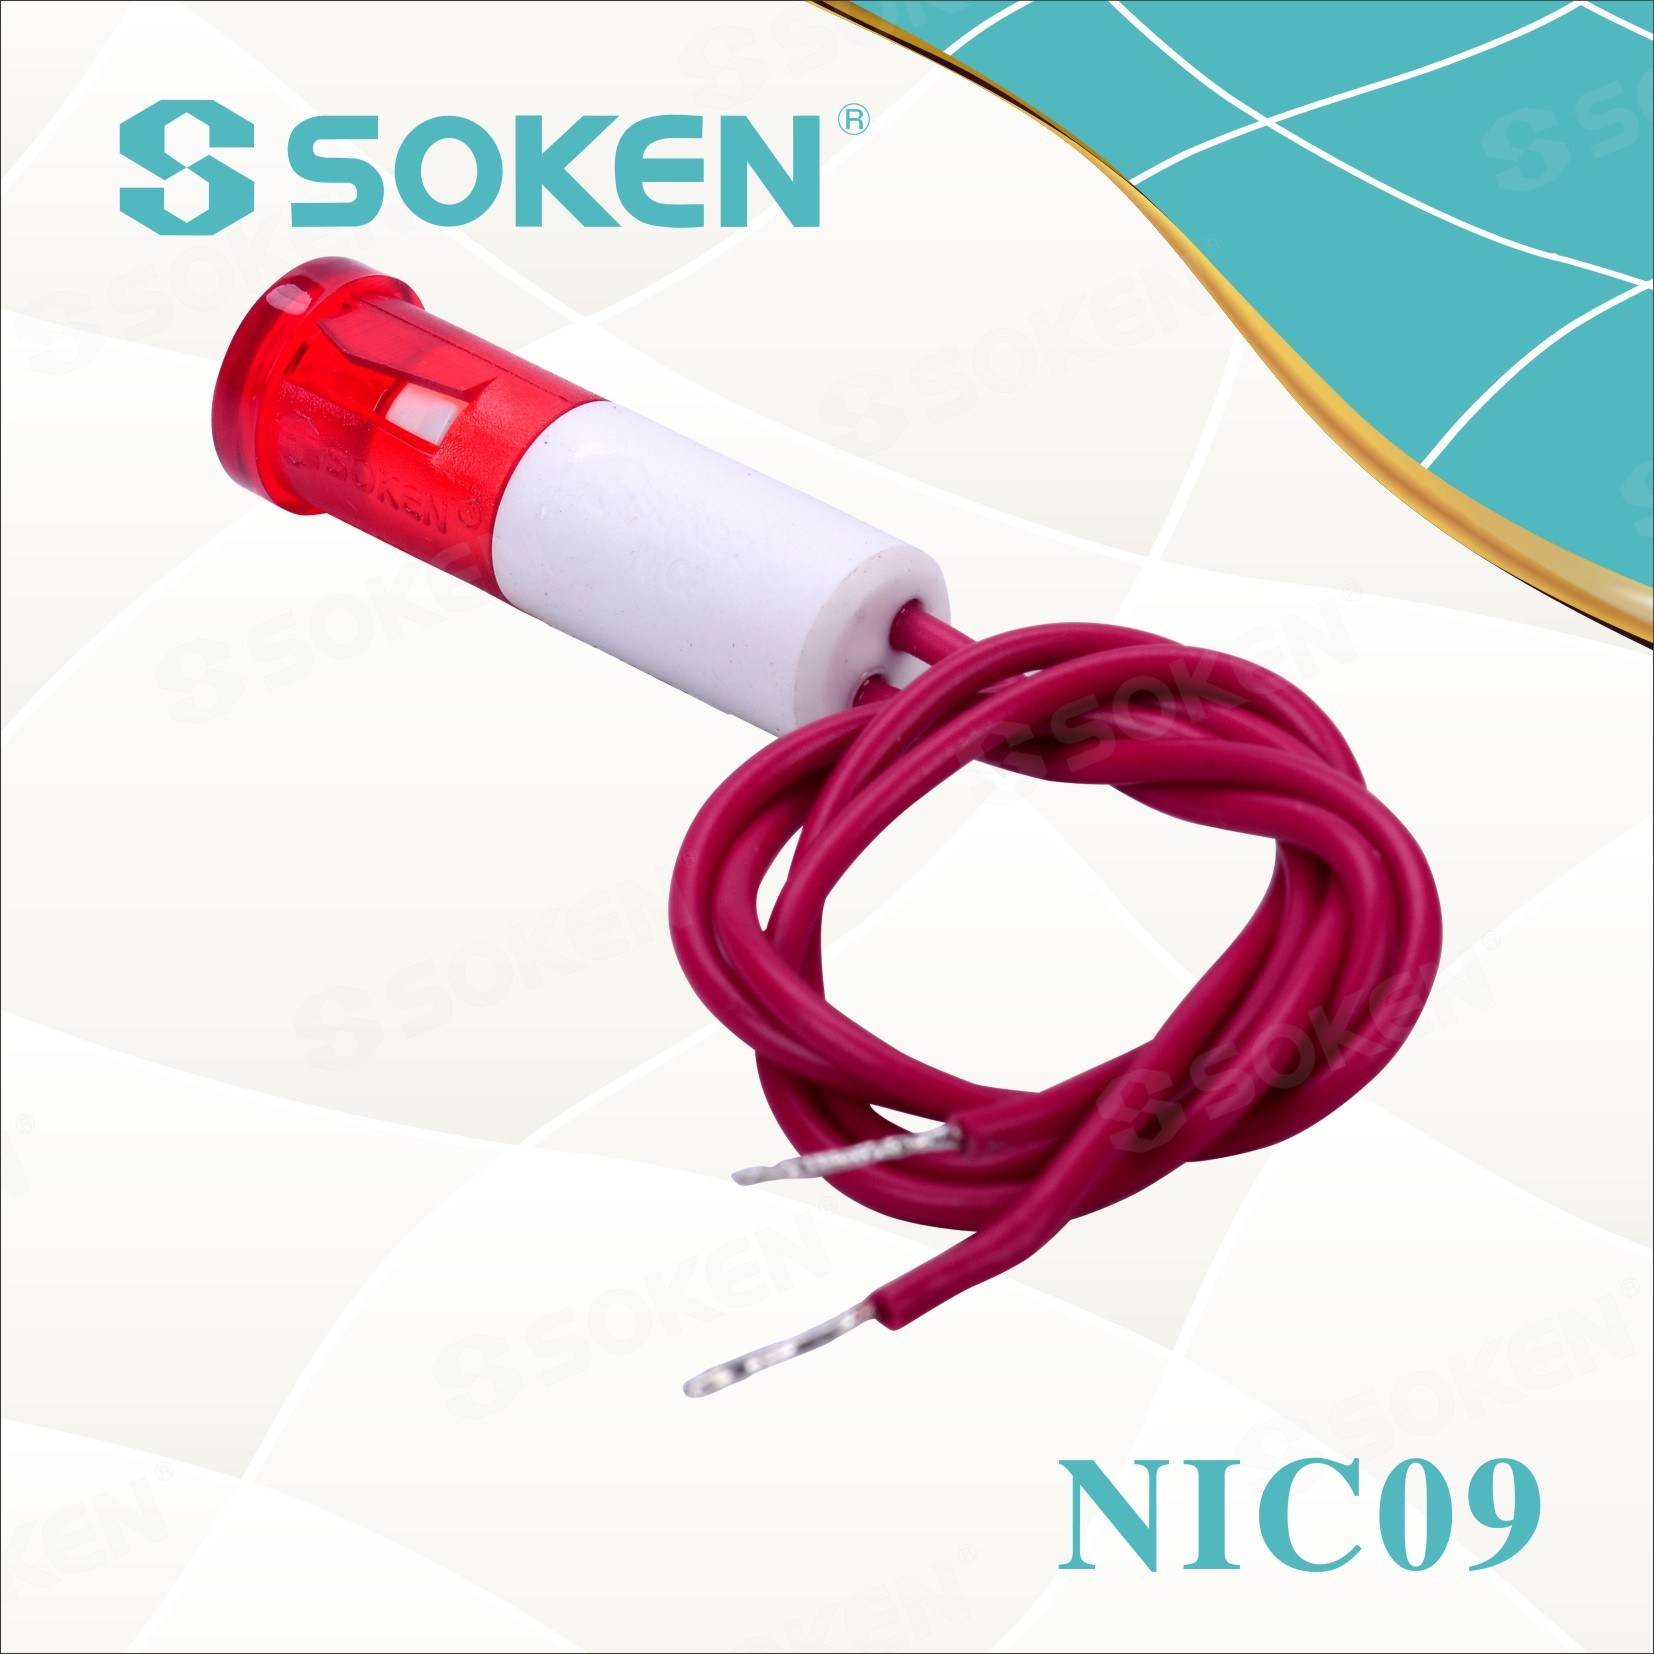 Professional China Traffic Induced Signal -
 Nic09 Signal Indicator Light with Wire 110V 250V 24V – Master Soken Electrical